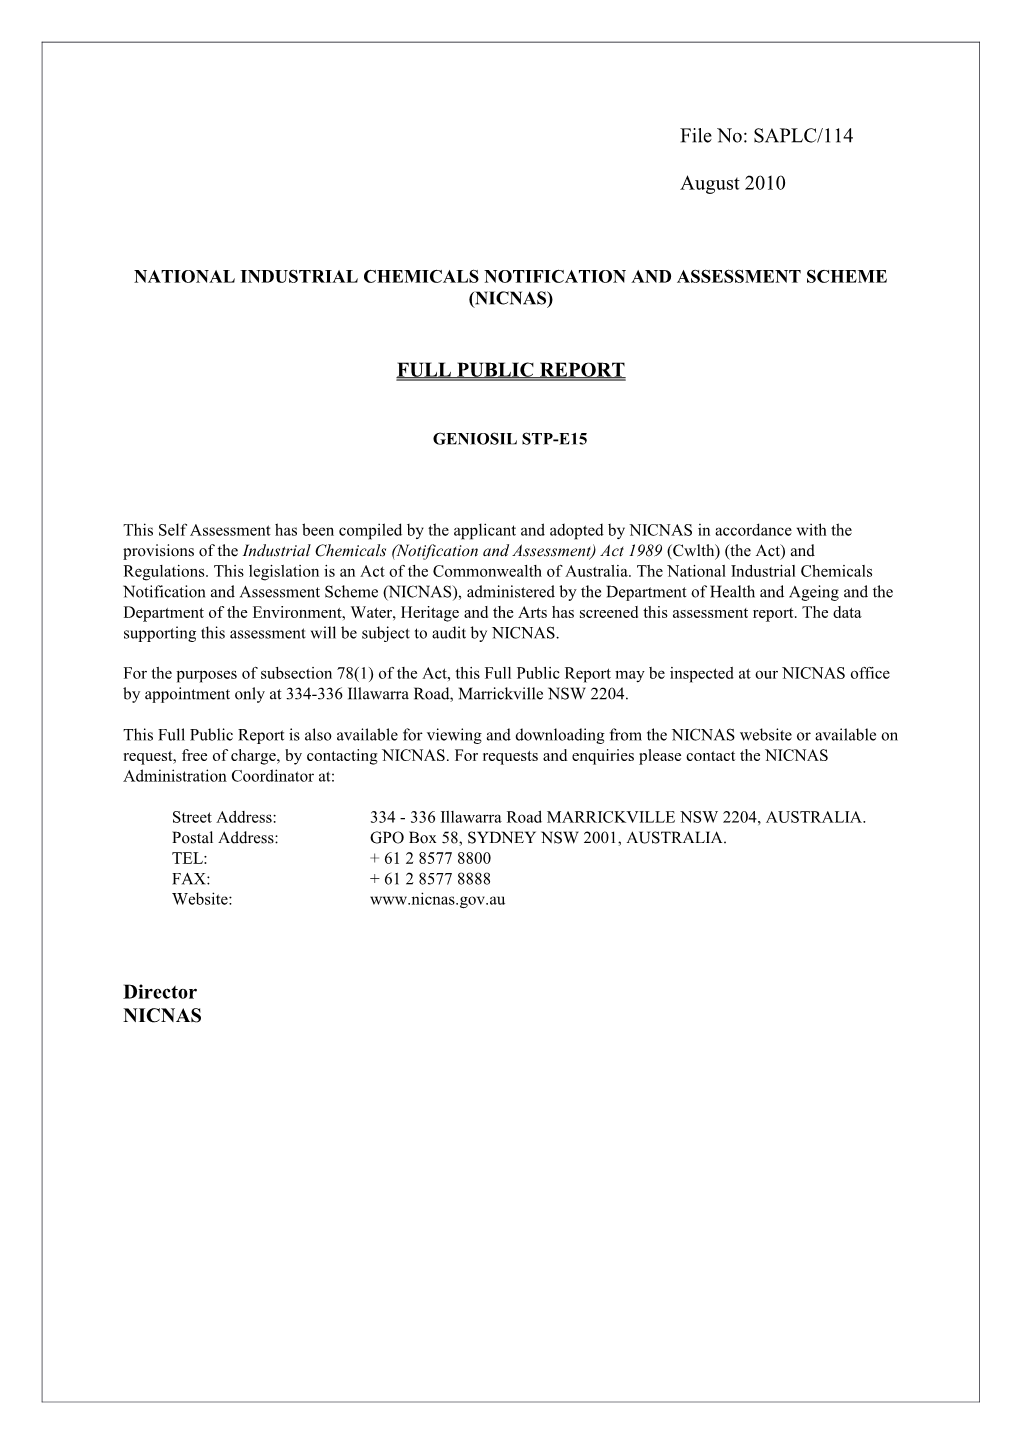 National Industrial Chemicals Notification and Assessment Scheme s44